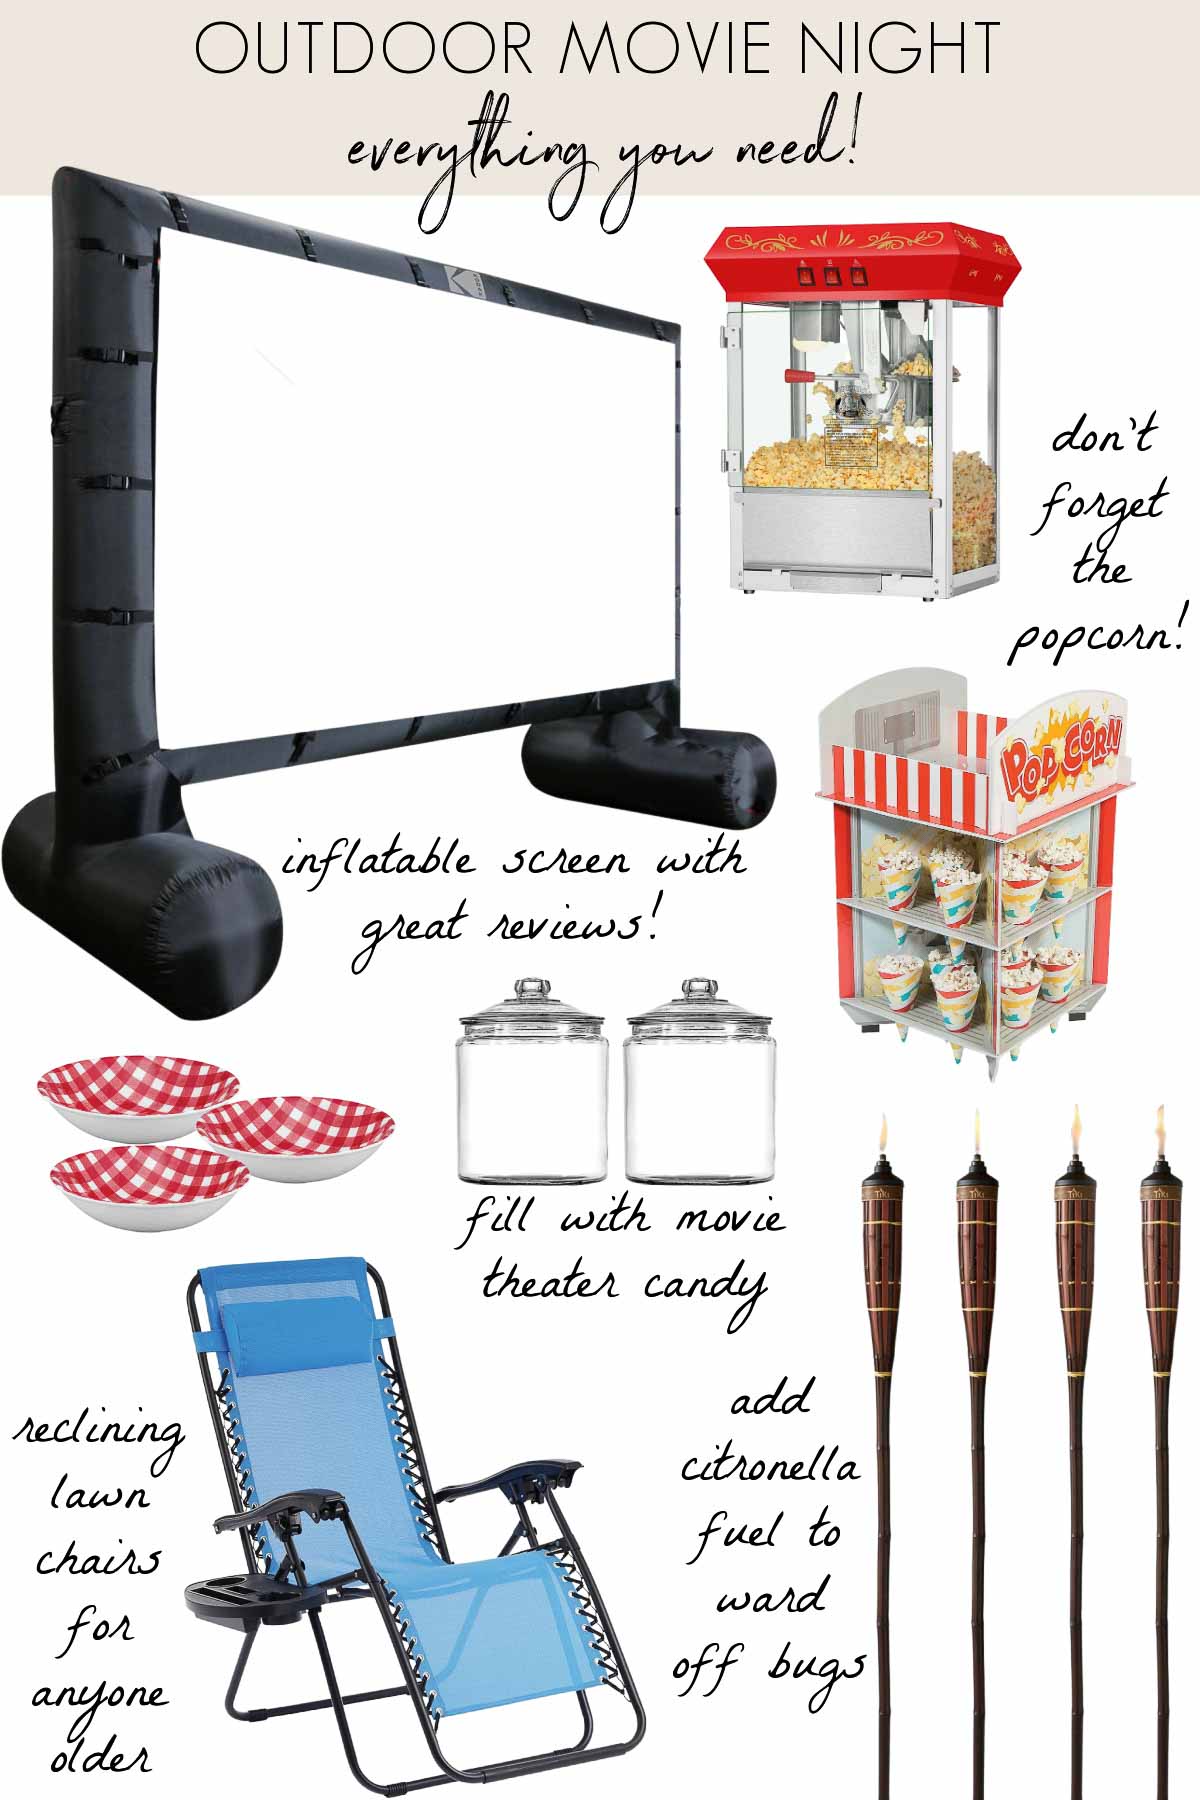 Everything you need for an outdoor movie night - screen, popcorn maker, chairs, and tiki torches